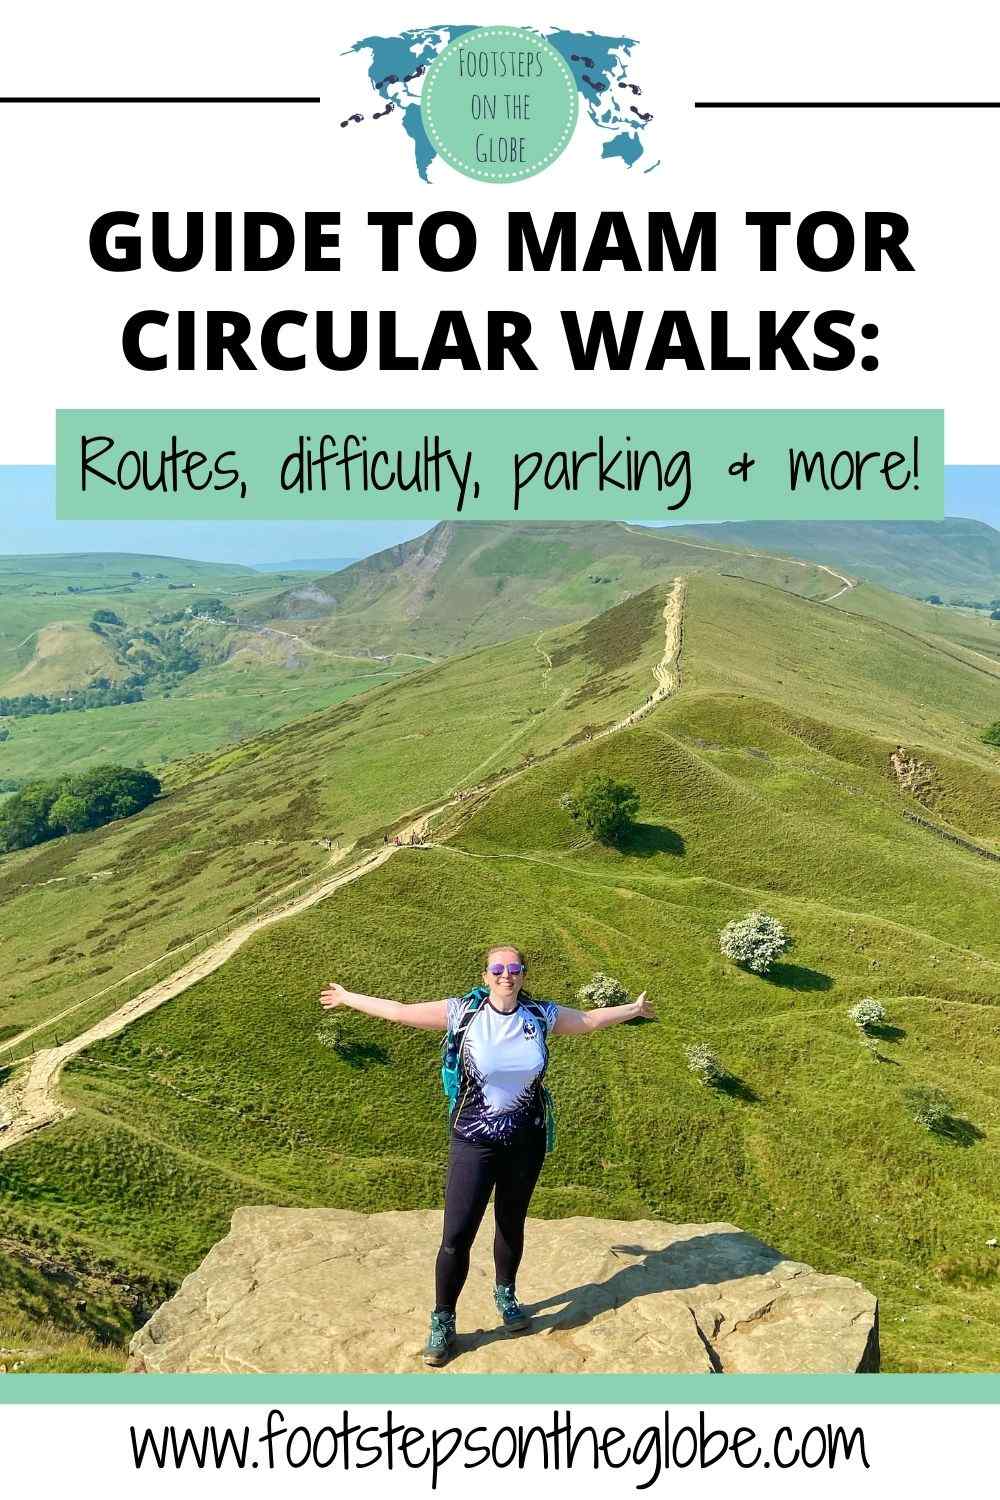 Pinterest image of Mel on the Mam Tor Circular with the text: "Guide to Mam Tor Circular Walks: Routes, difficulty, parking & more!"